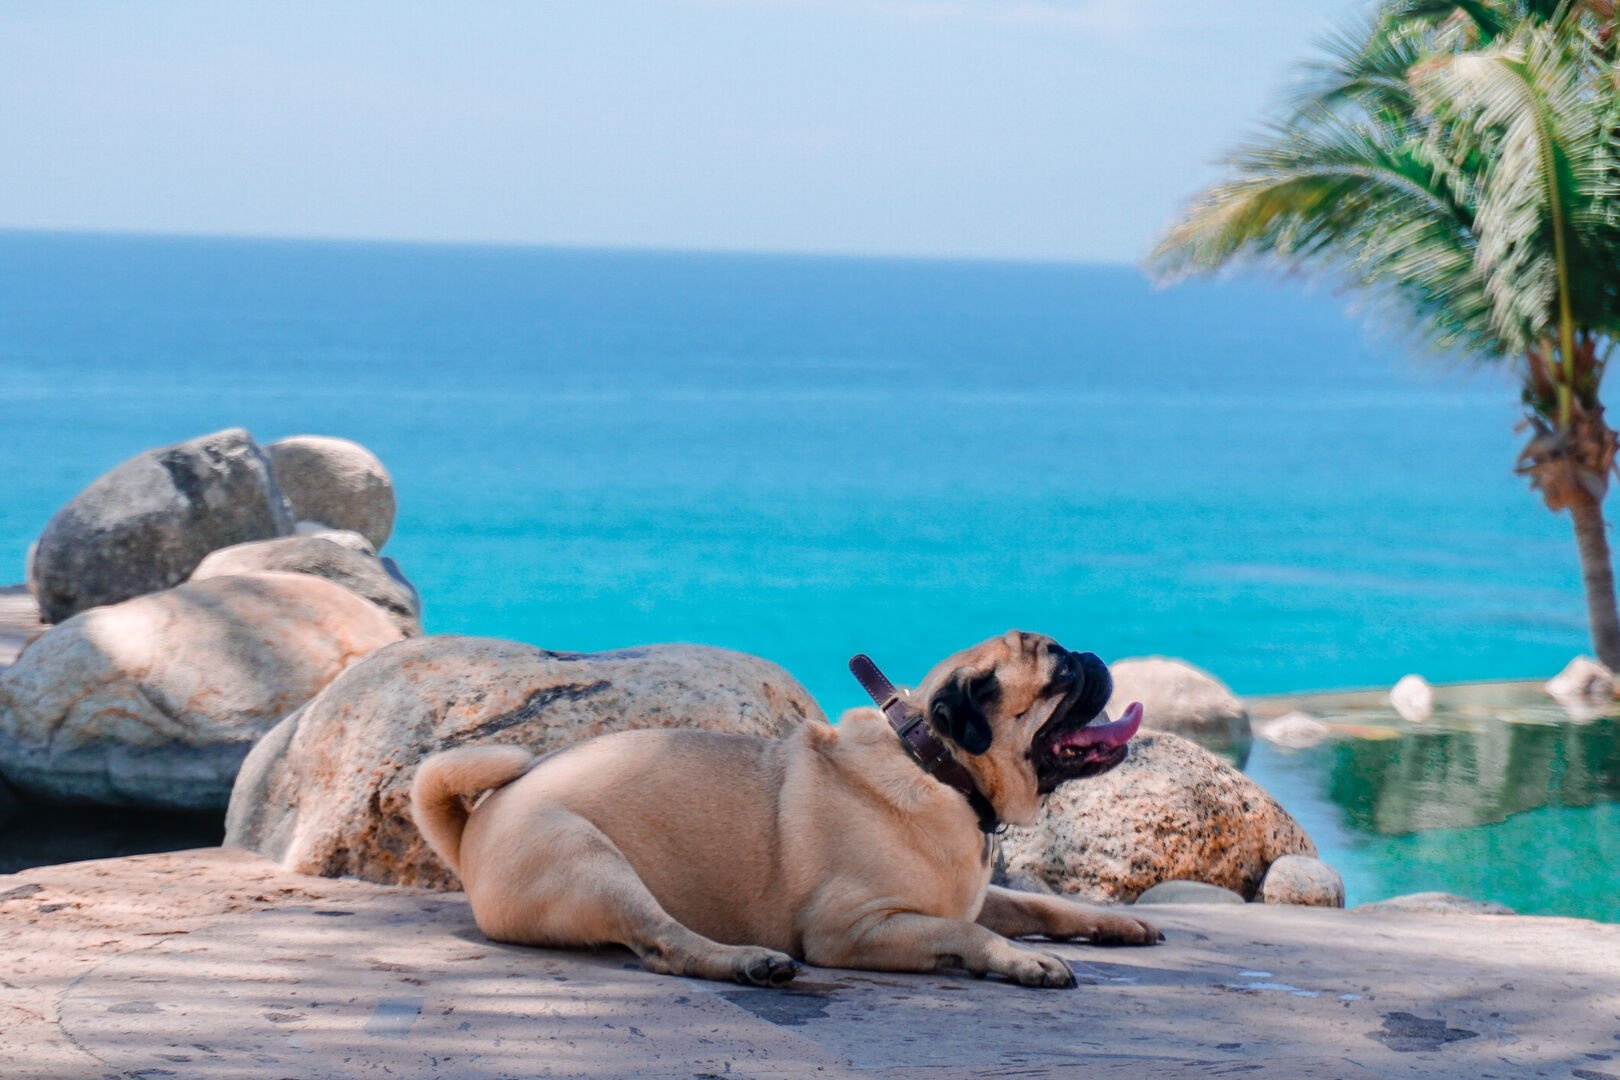 PET FRIENDLY, BRING YOUR BEST FRIEND ON VACATION